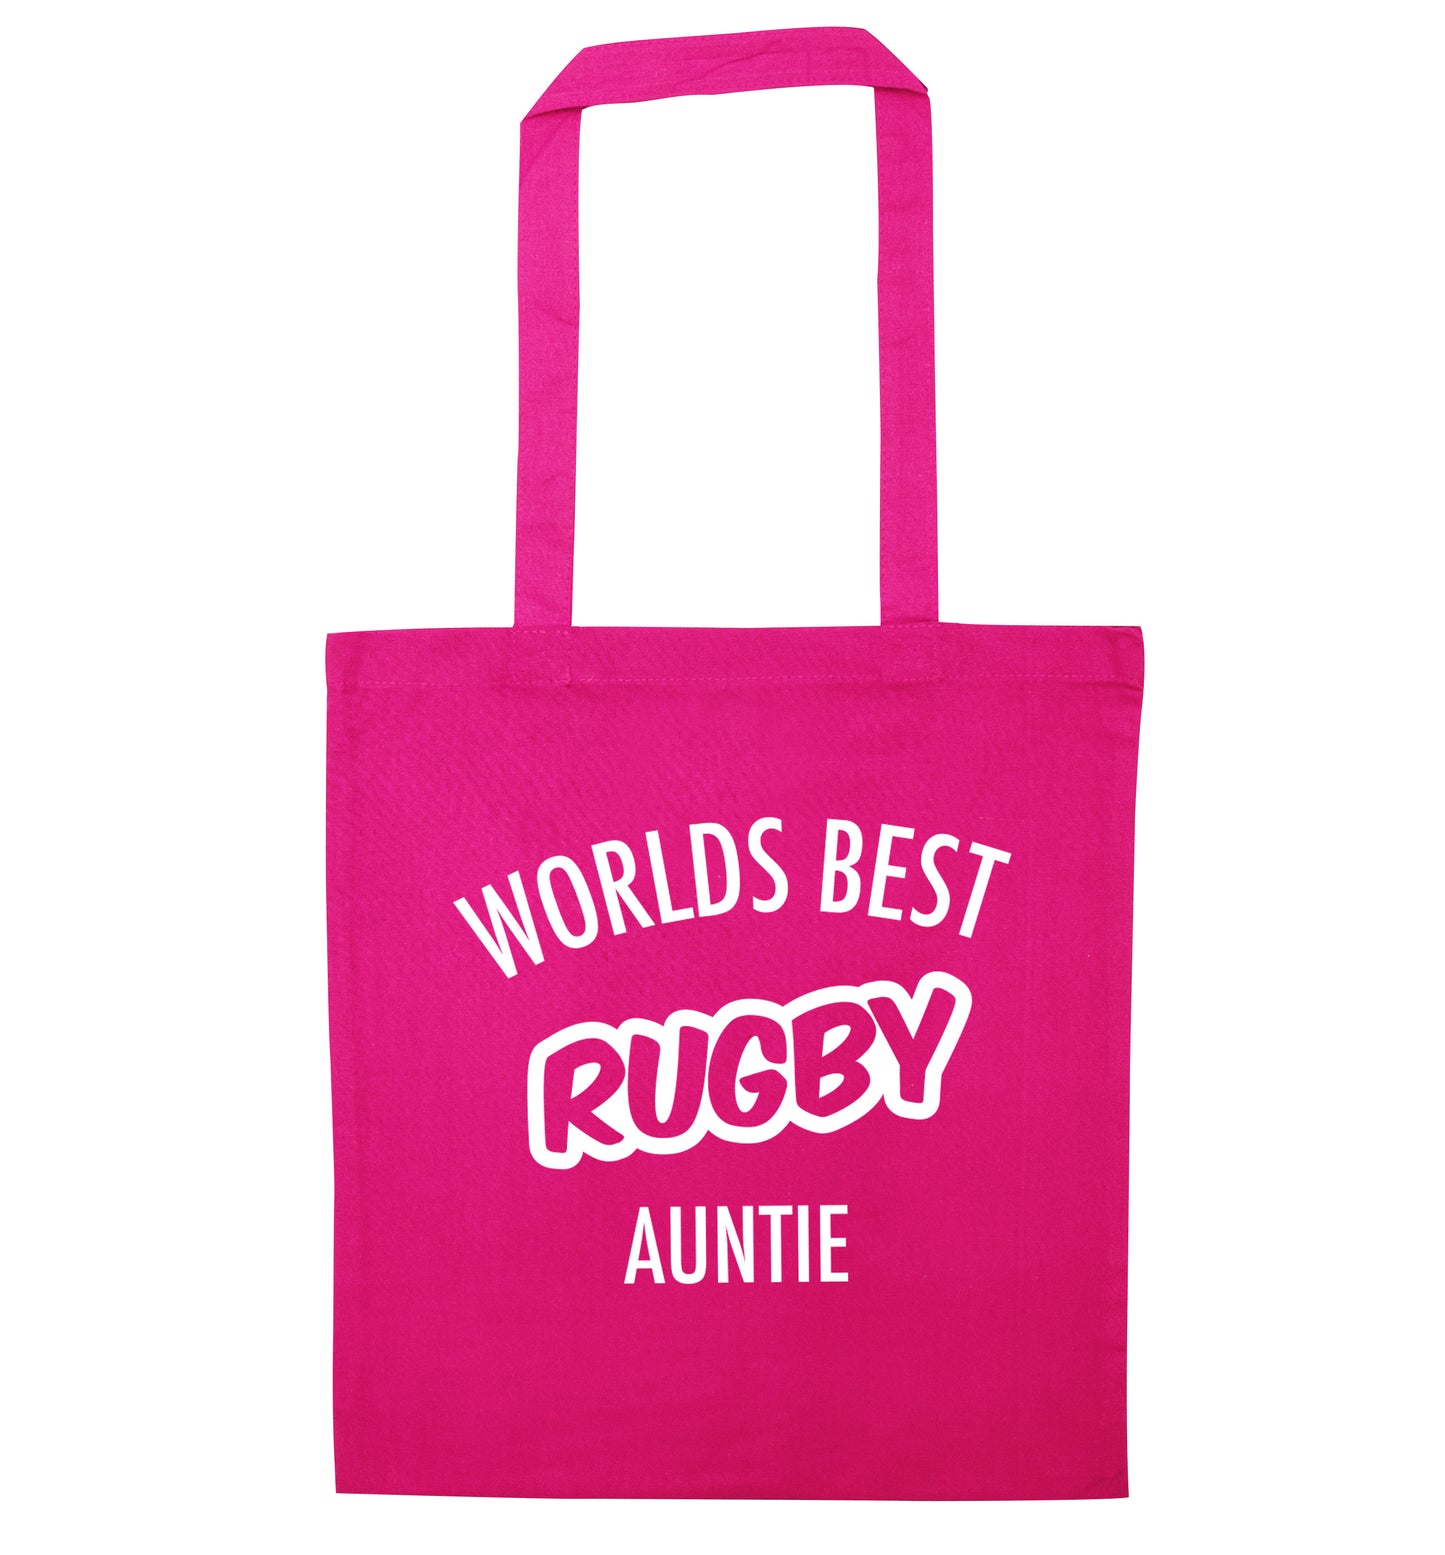 Worlds best rugby auntie pink tote bag